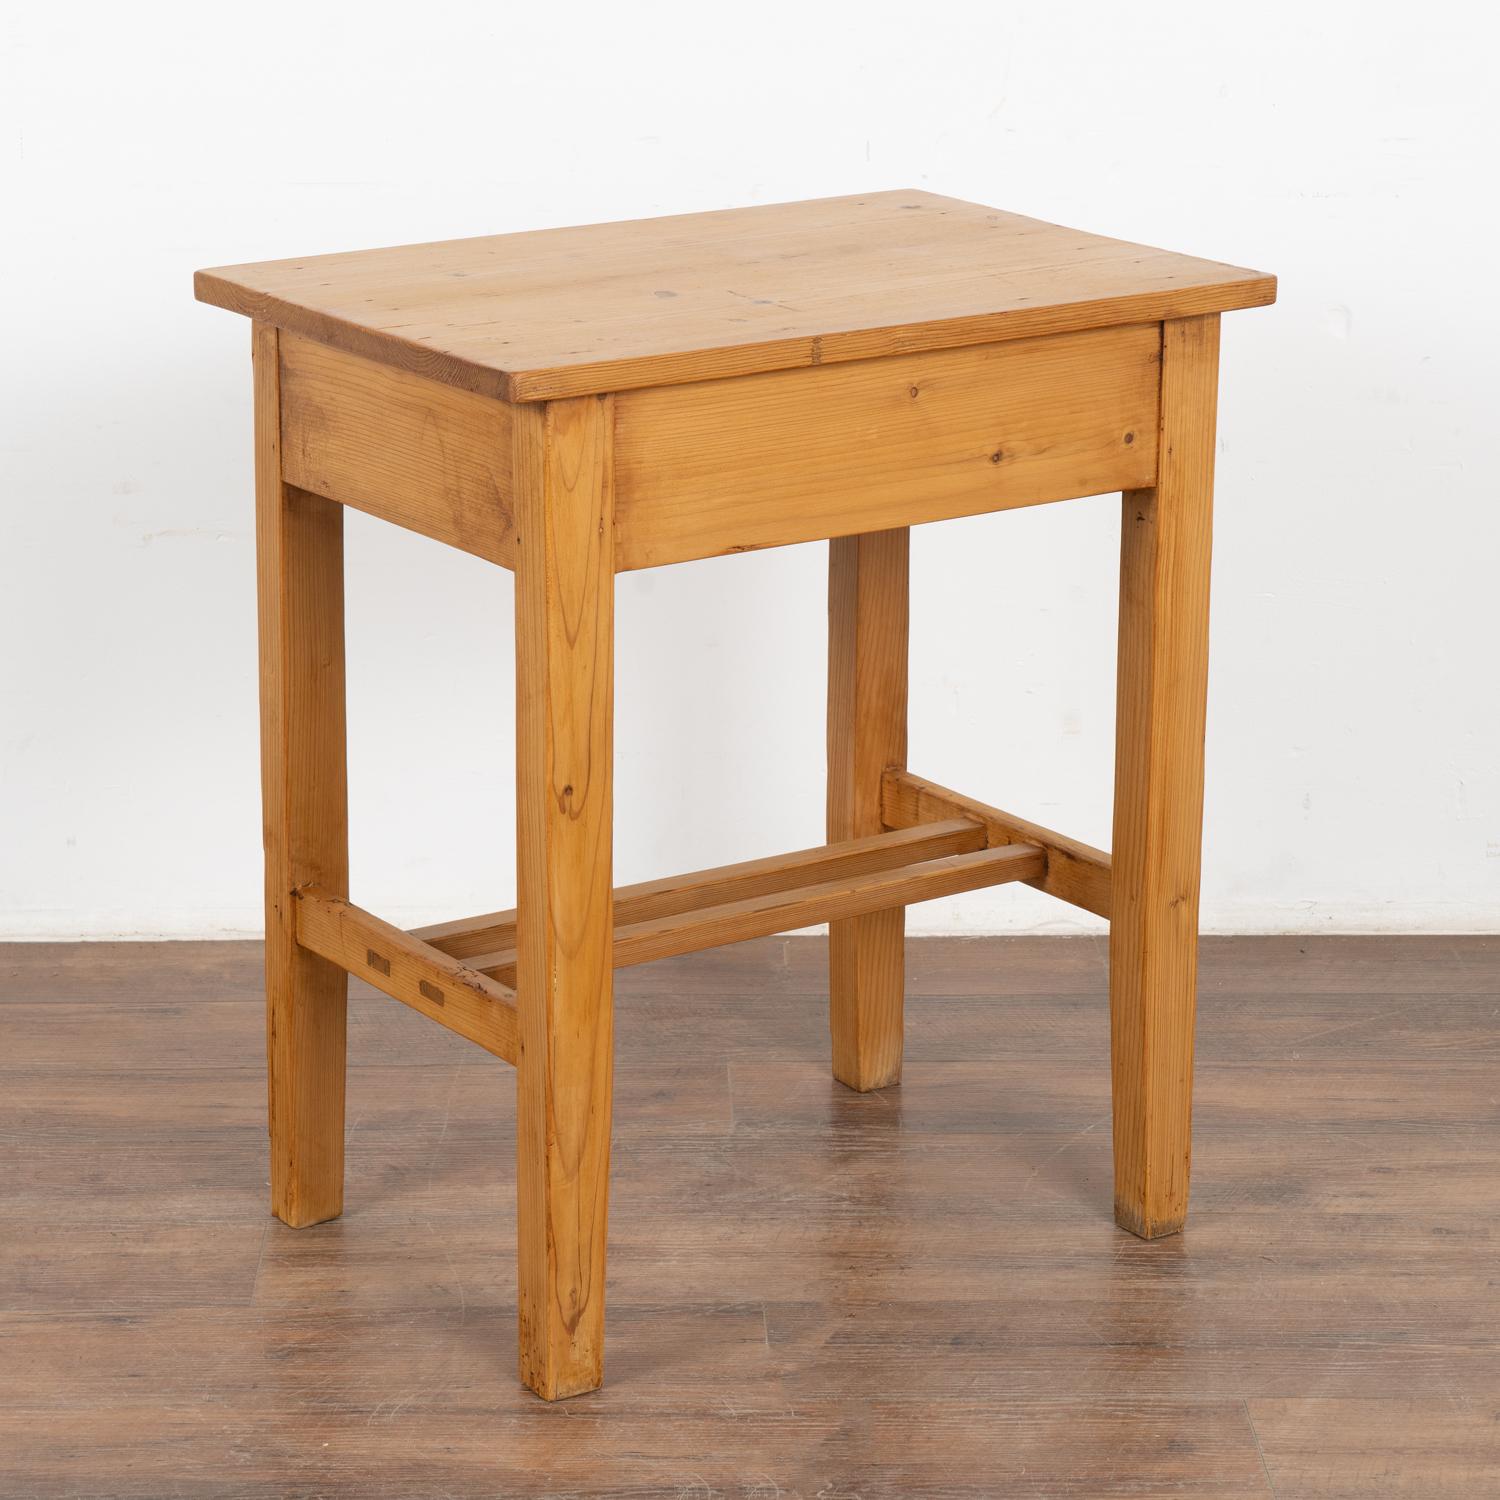 Small Pine Nightstand Side Table, Denmark circa 1900 For Sale 3